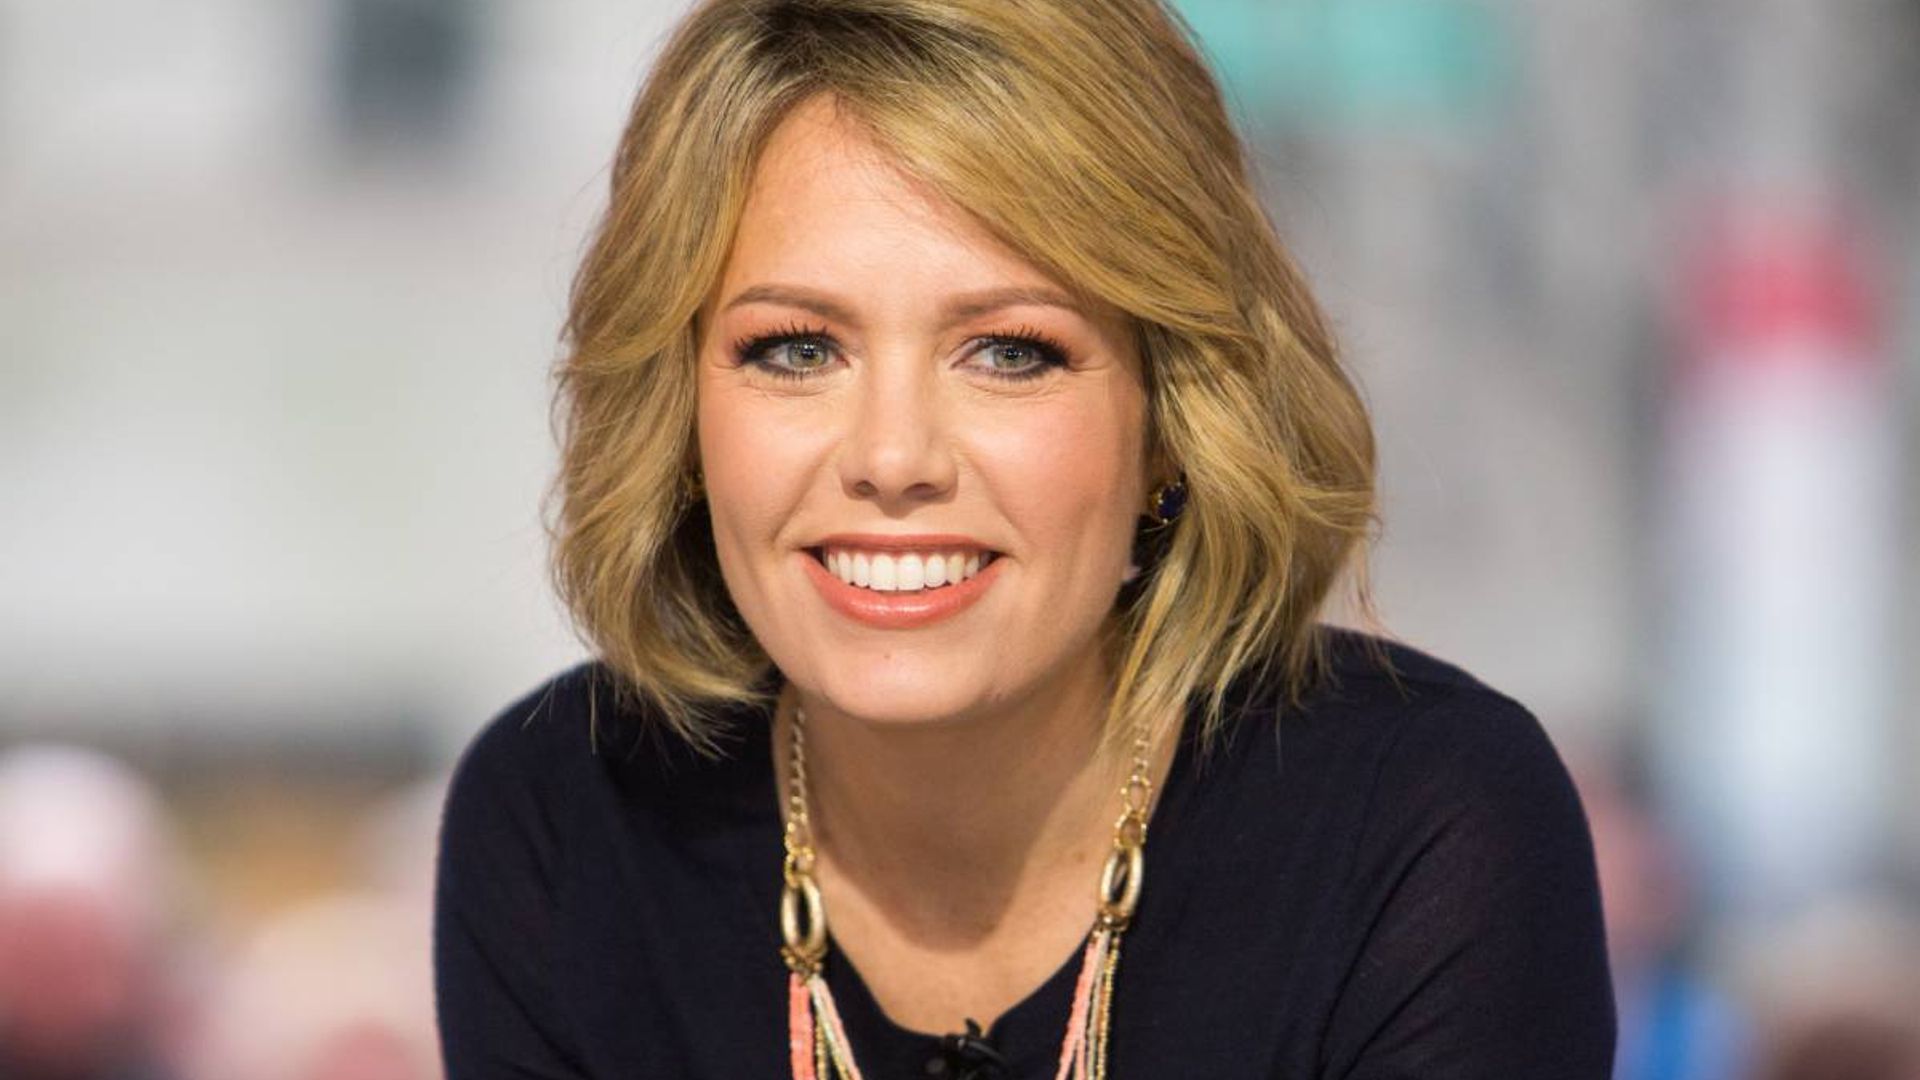 Dylan Dreyer reveals exciting family news amid pregnancy announcement